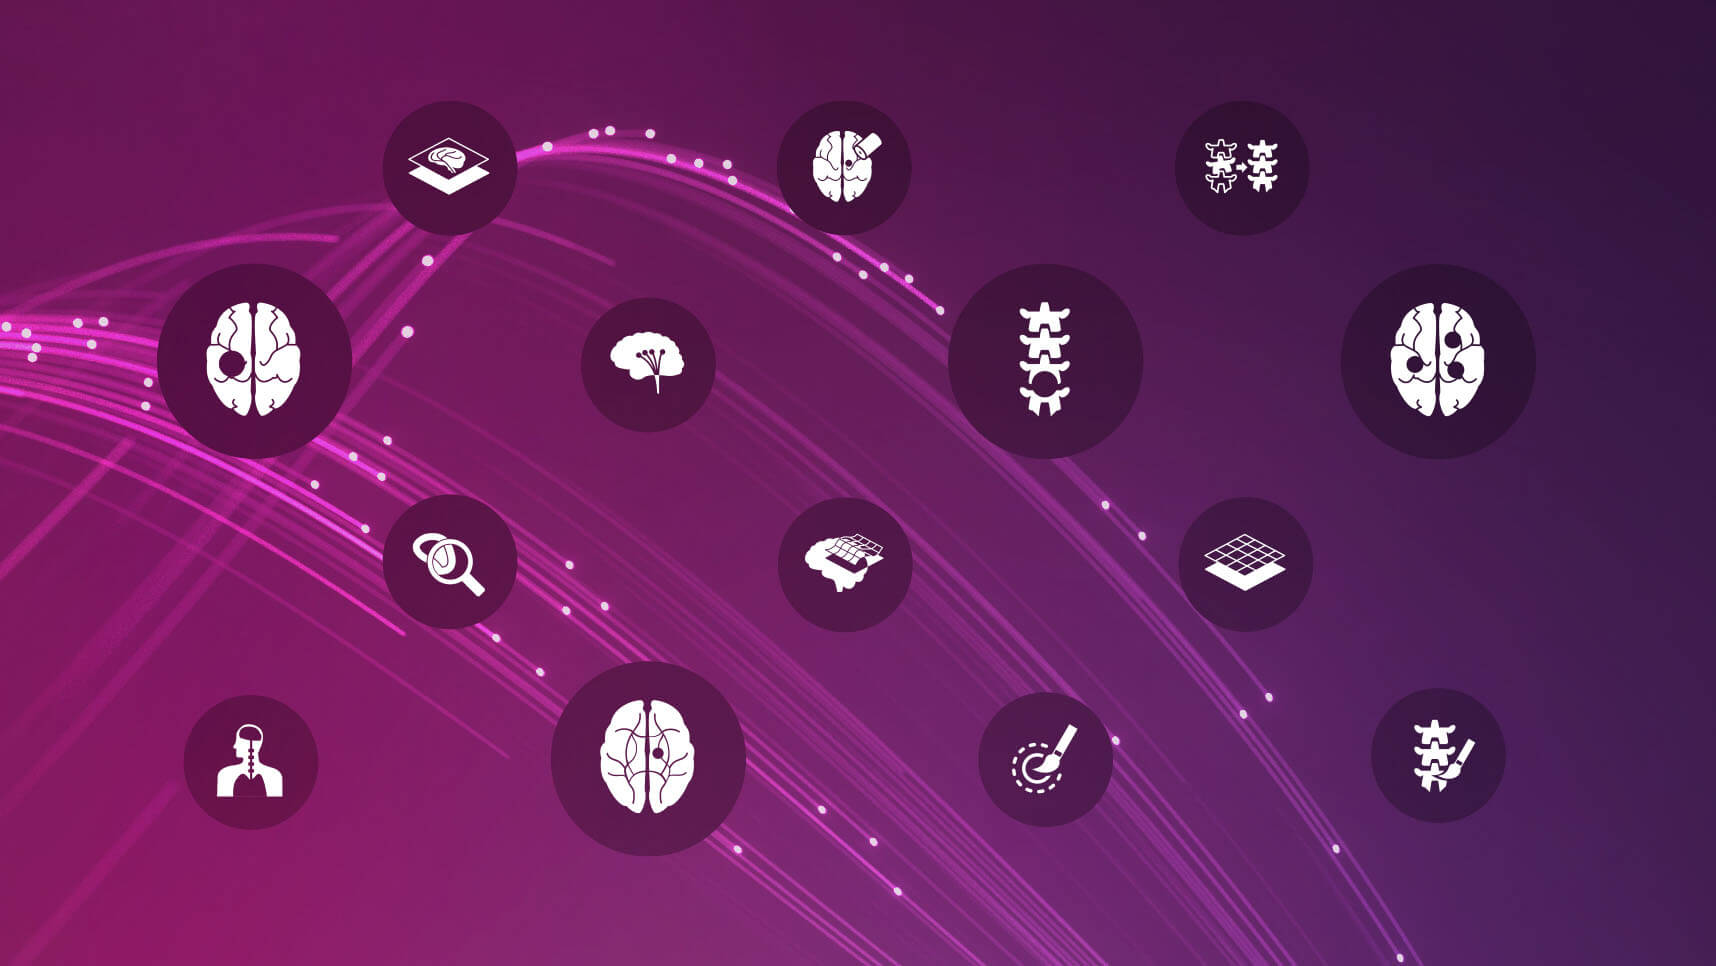 Teaser Image: Lilac Background with White Icons - Brainlab Neurosurgery Products